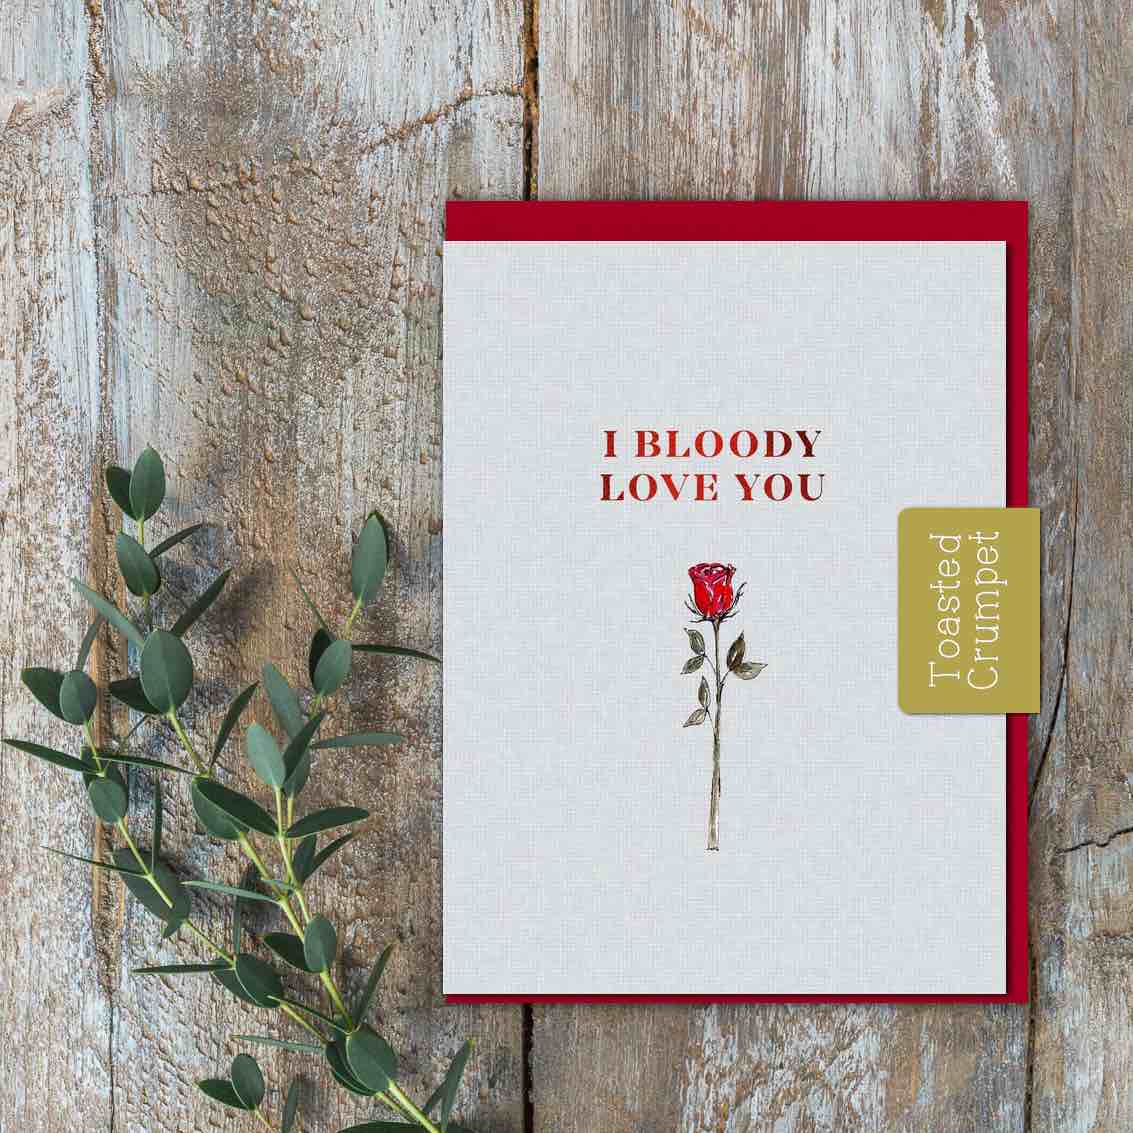 I Bloody Love You (Rose) Cello-Free Single Card